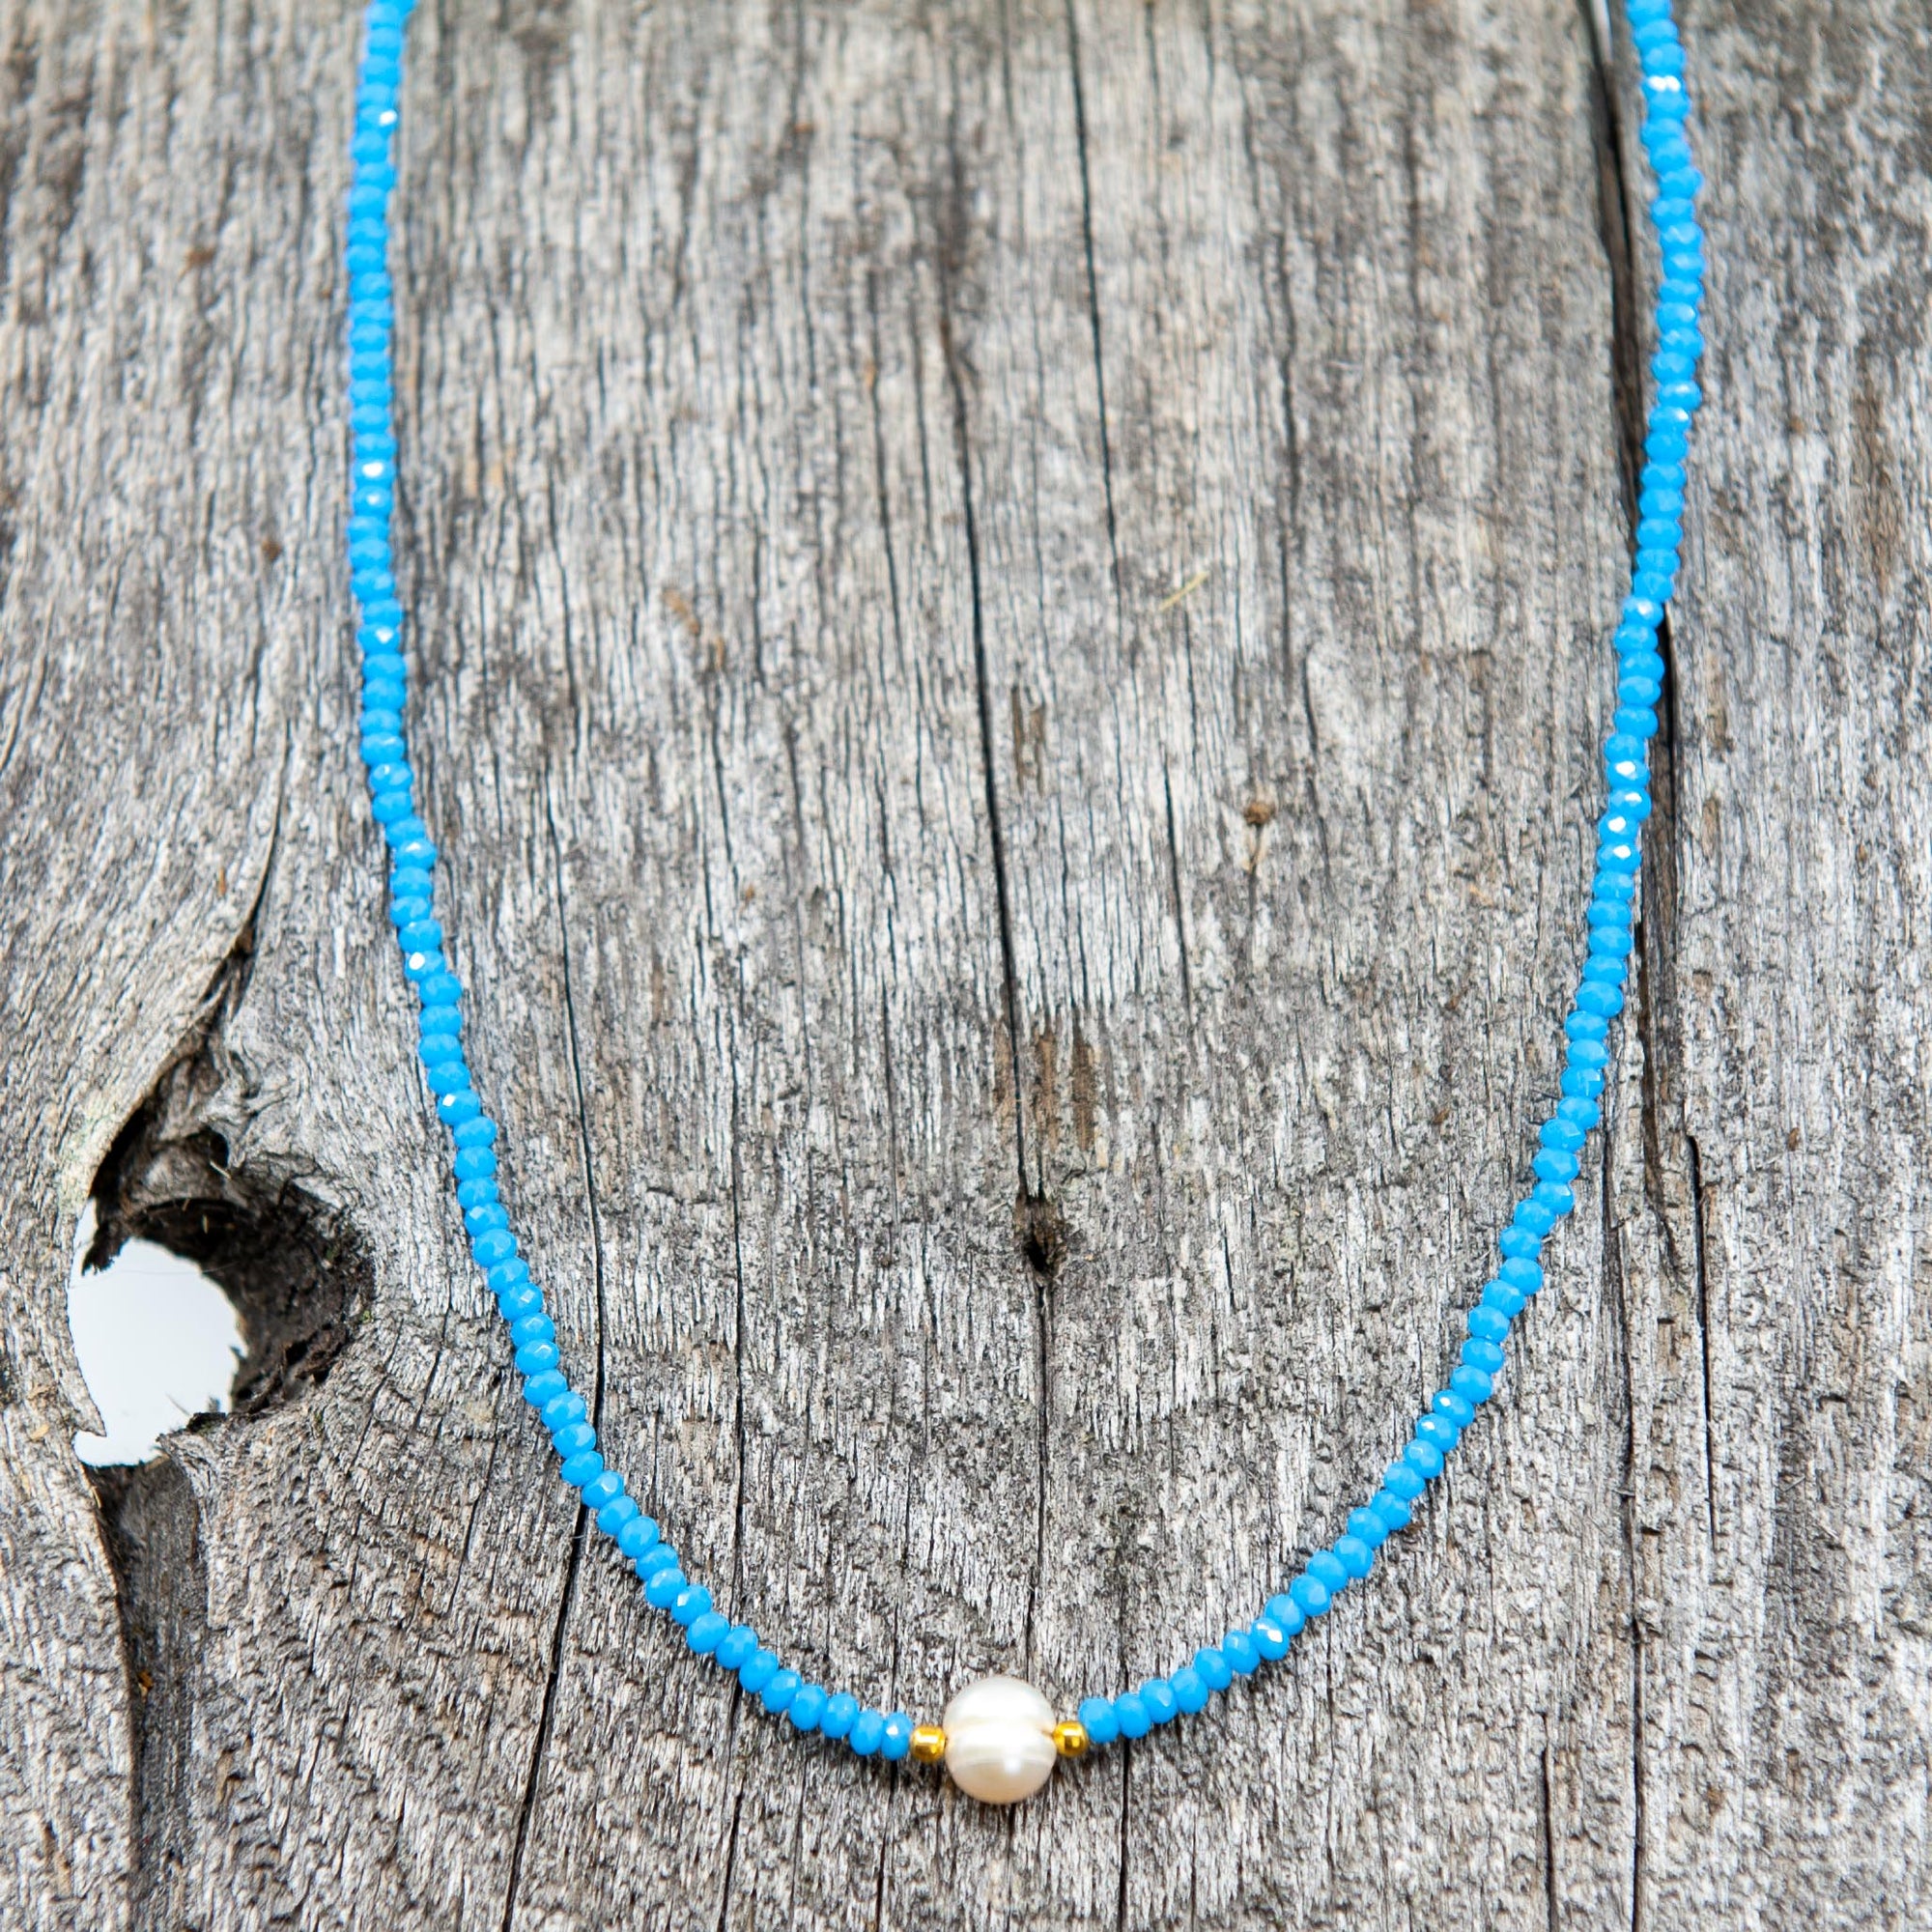 Bali Pearl Necklace with Dainty Blue Beads